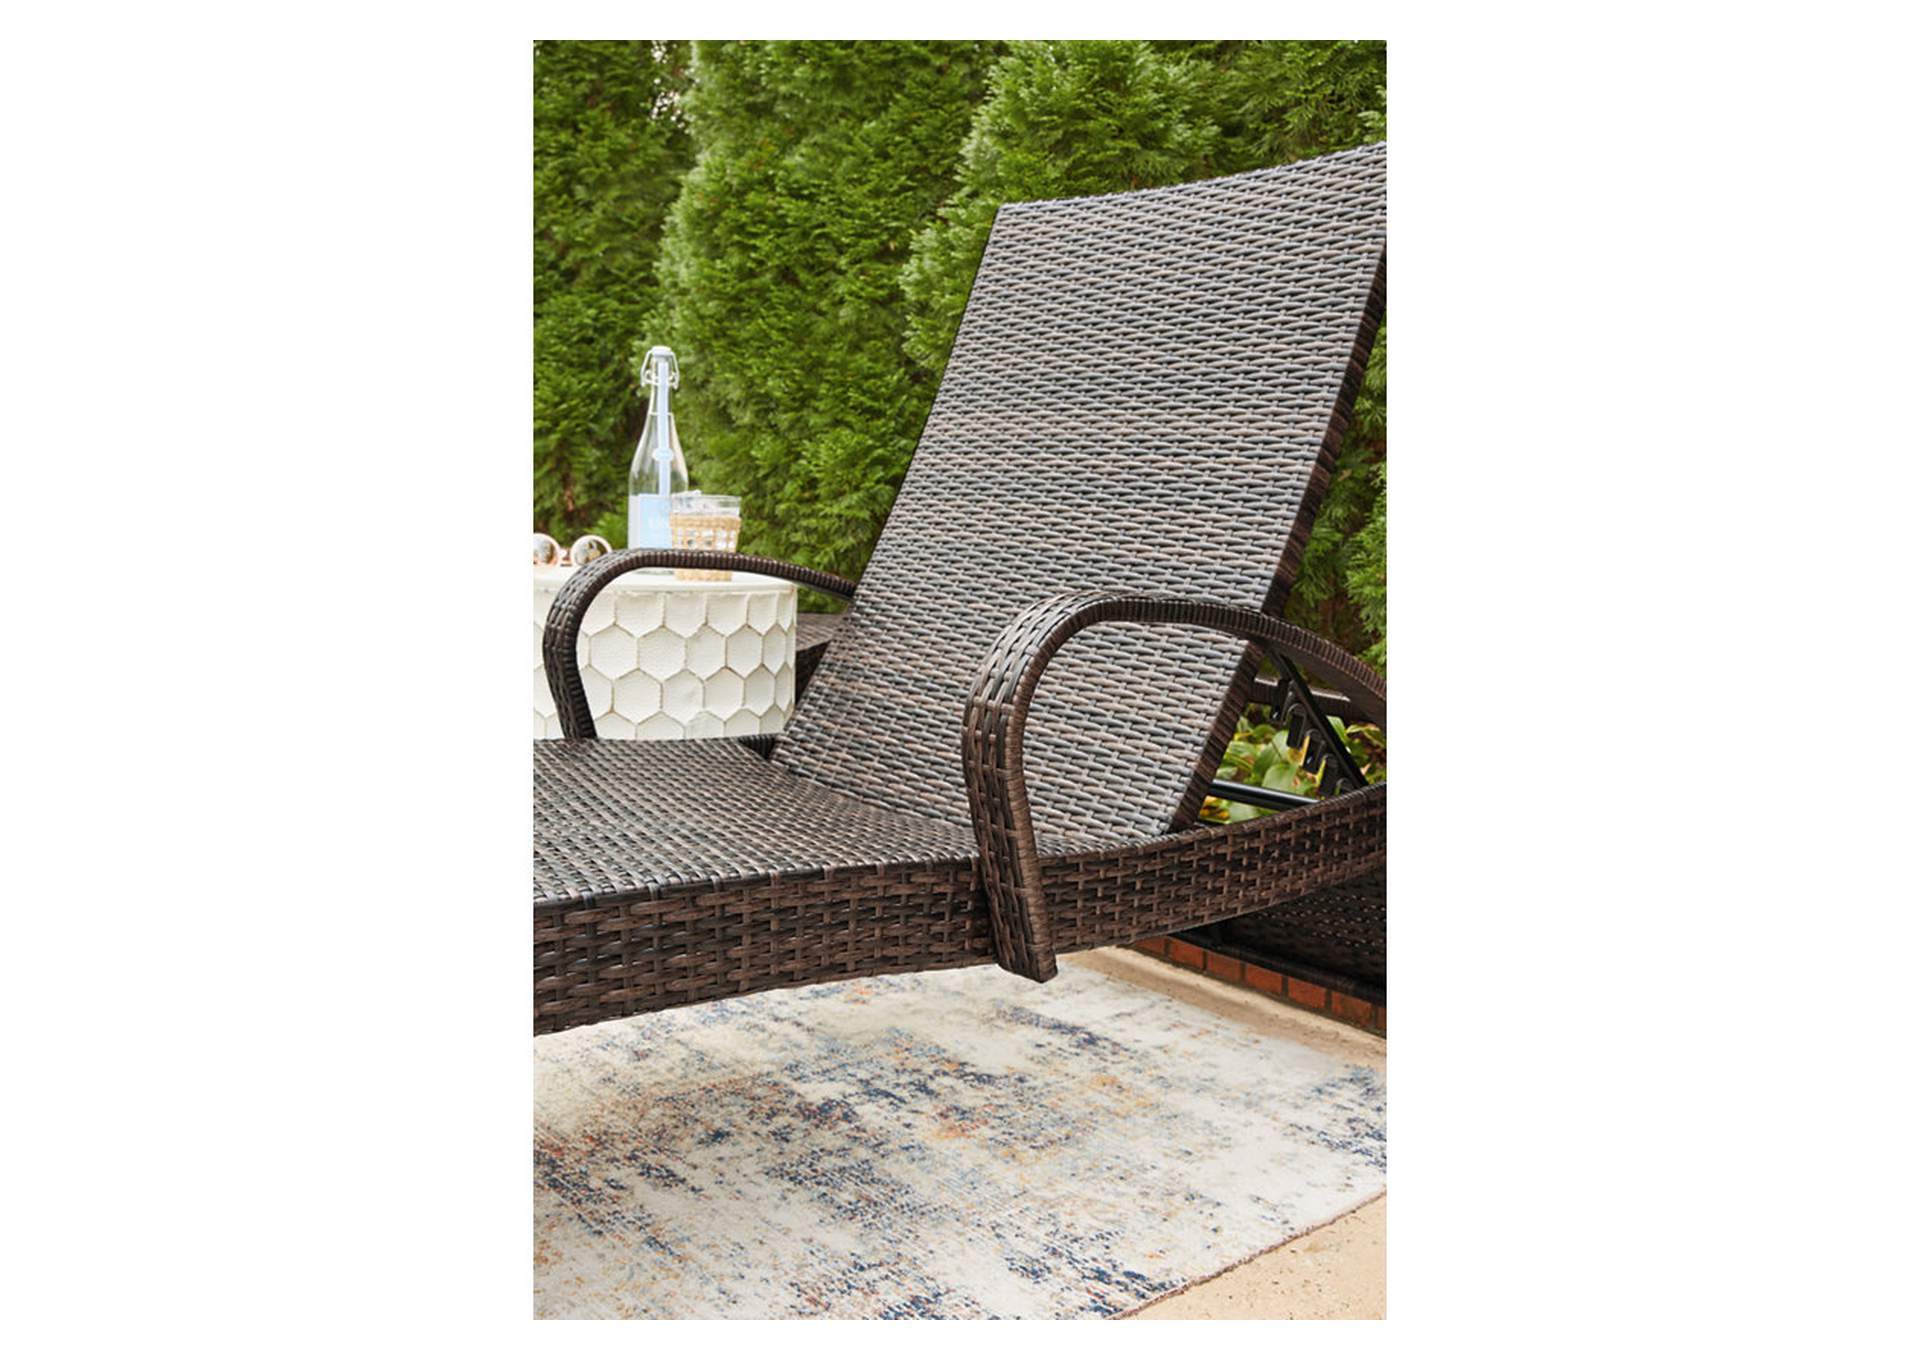 Kantana Chaise Lounge (set of 2),Direct To Consumer Express